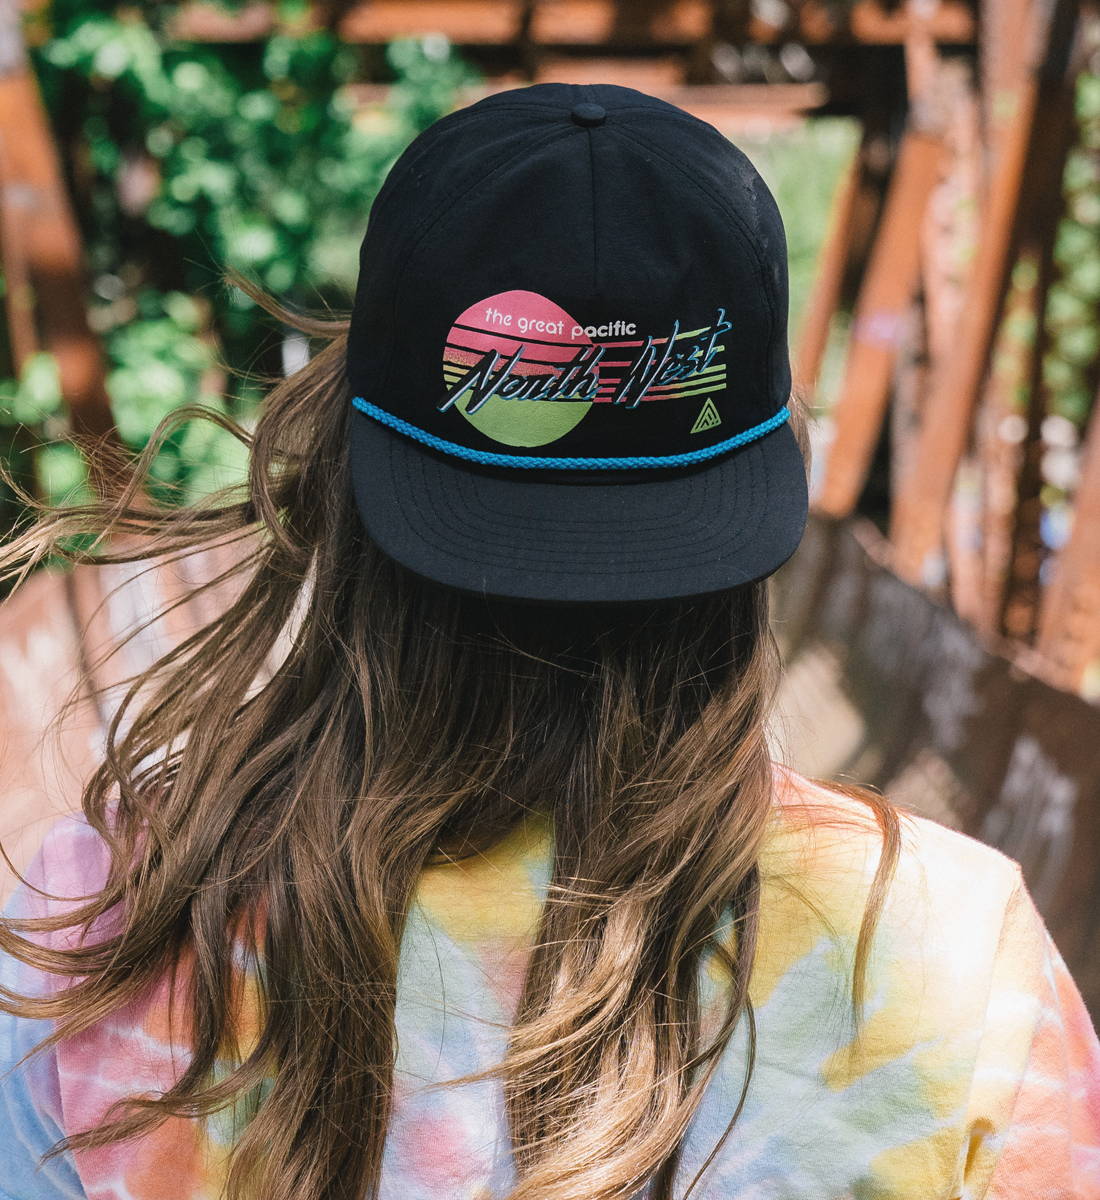 The Great PNW Speedway Hat